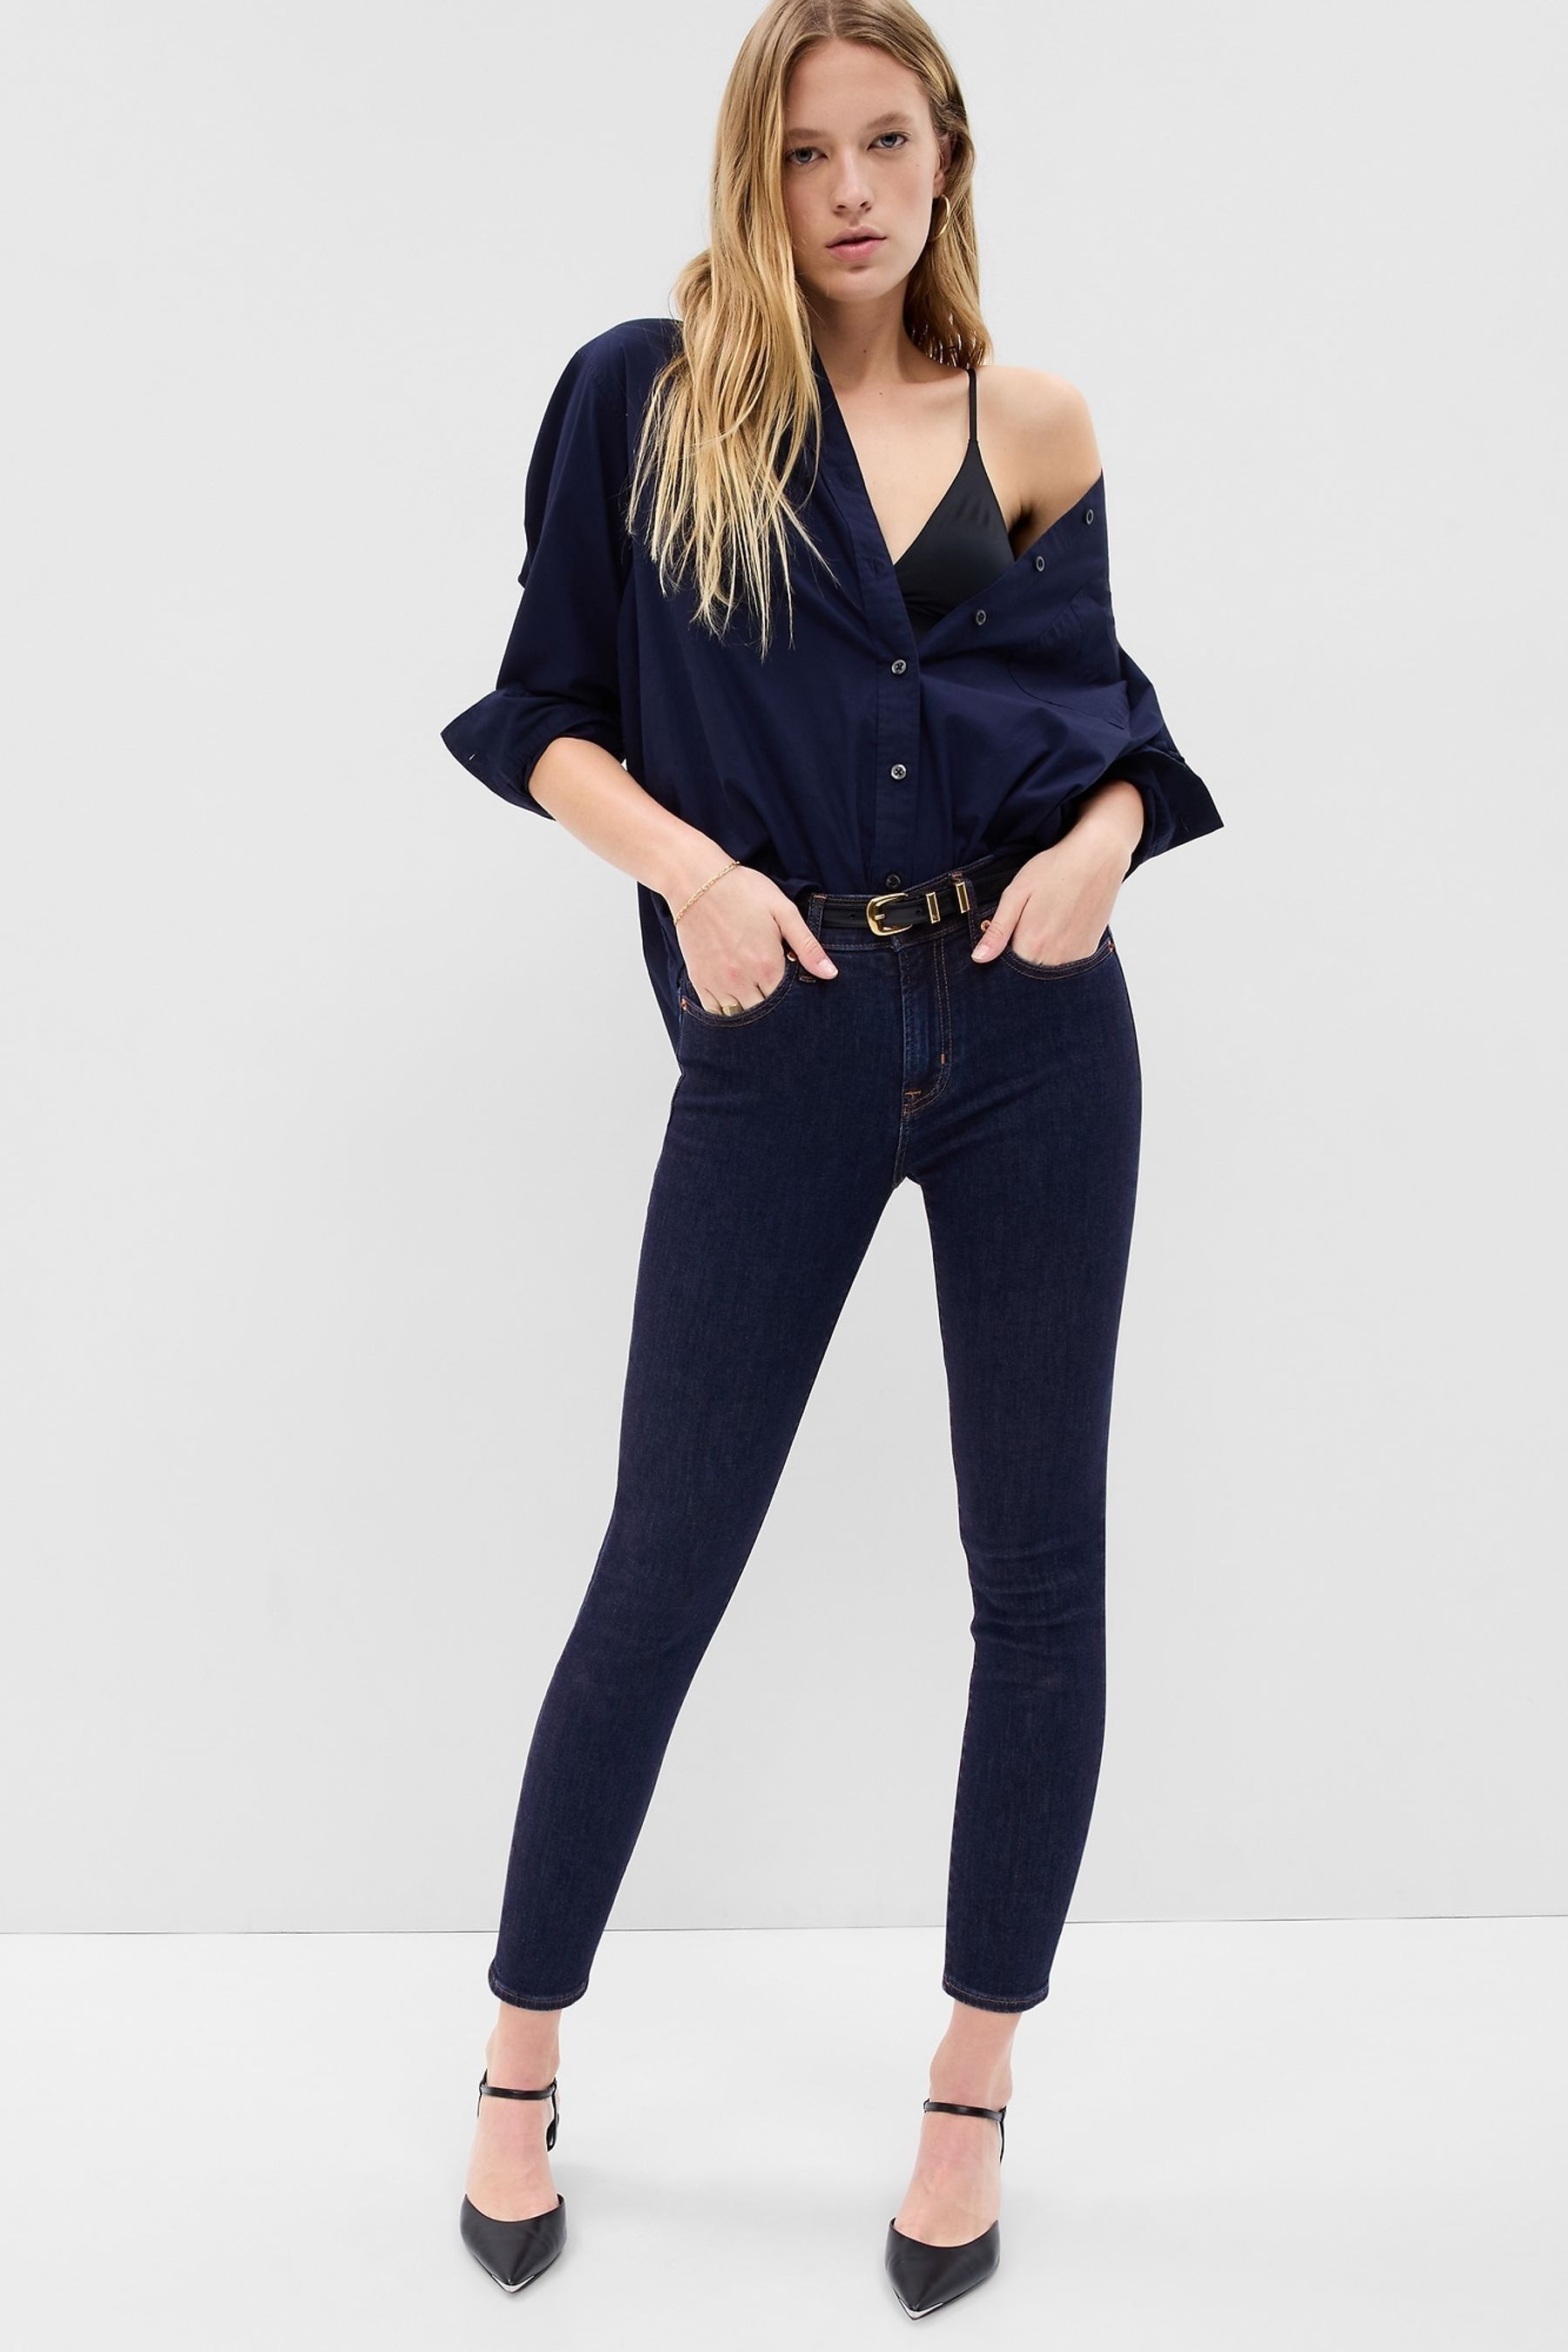 Buy Gap Indigo Blue Mid Rise True Skinny Jeans from the Next UK online shop